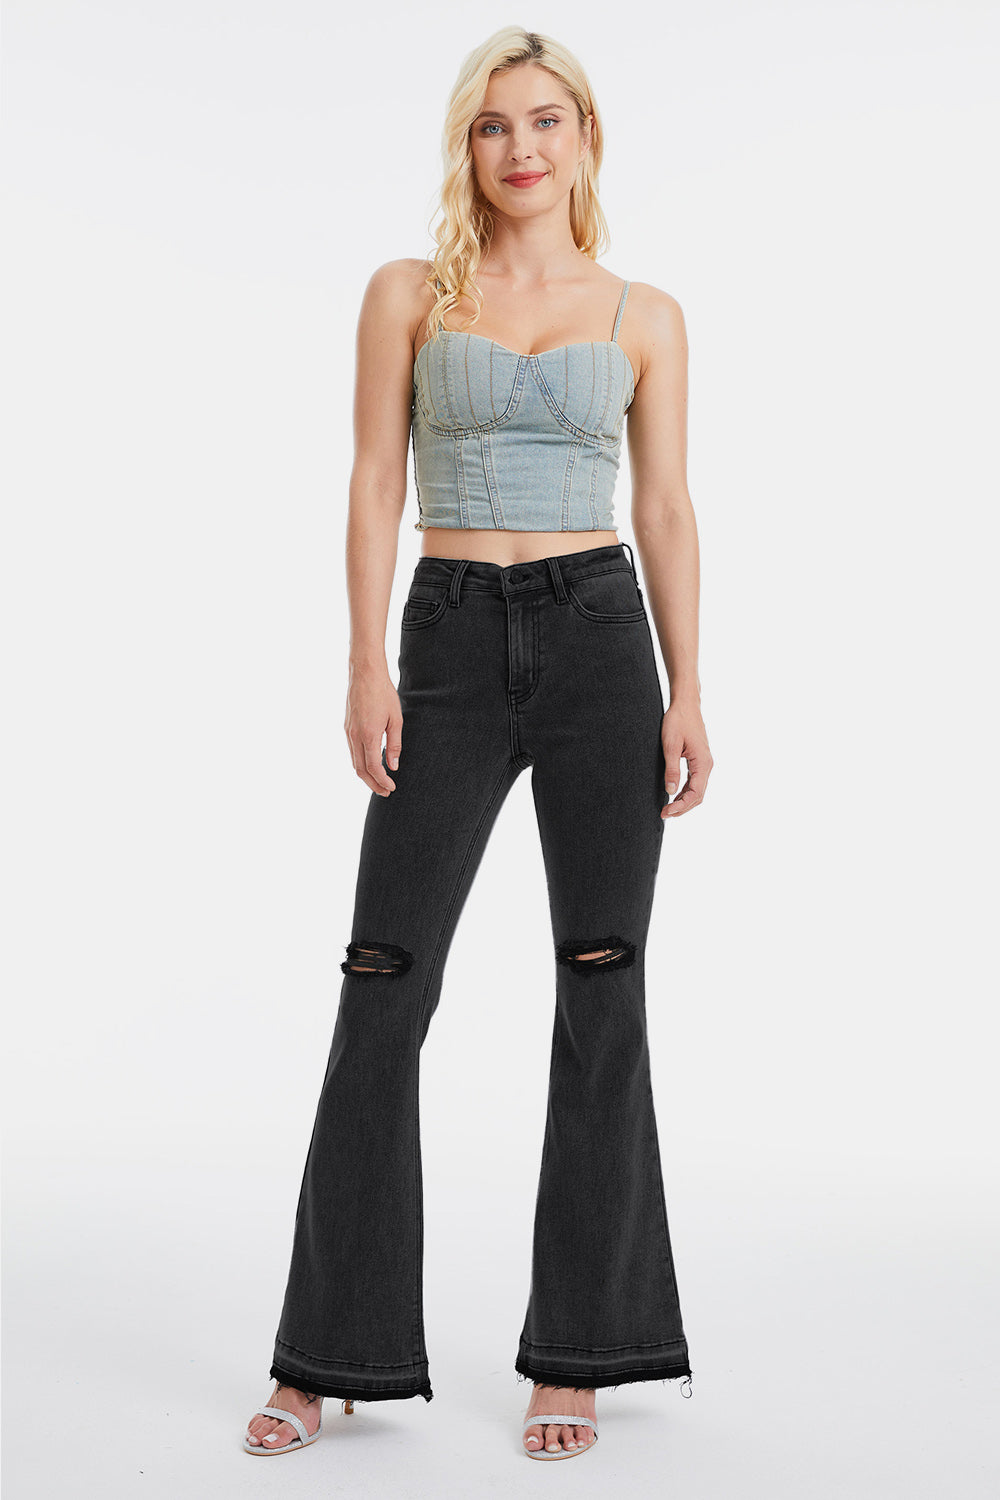 BAYEAS Full Size High Waist Distressed Raw Hem Flare Jeans free shipping -Oh Em Gee Boutique